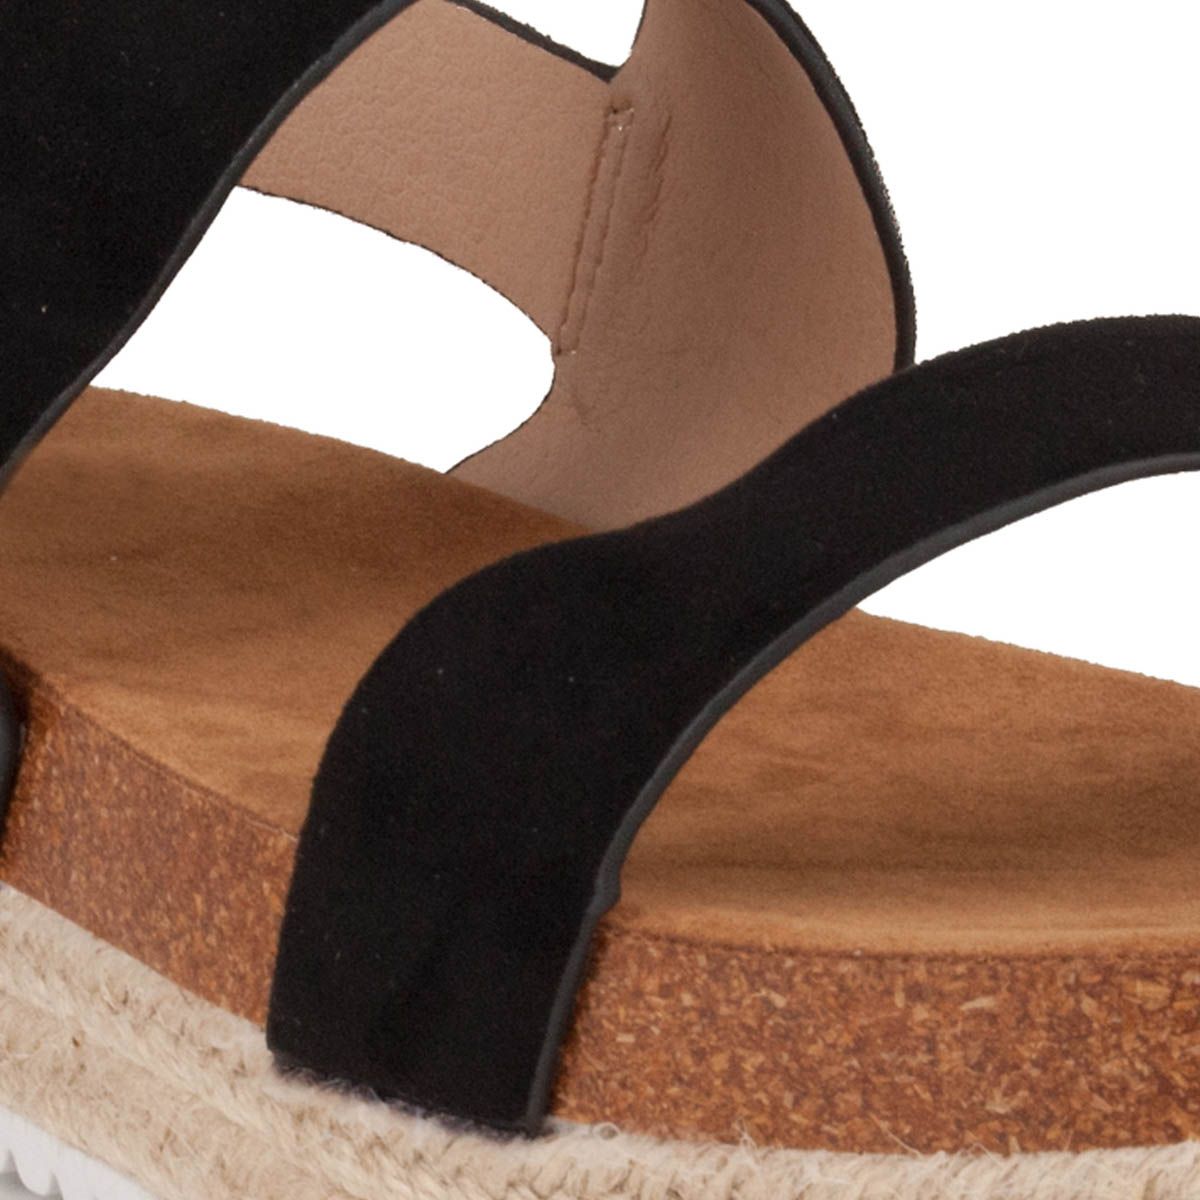 Platform and bioanatomic floor ideal for summer. Manufactured in easy material from Limpar and Comfortable. The floor is a combination of Esparto and rubber cork that give a special and unique air. Height heel 5 cm and platform of 4.5 cm.